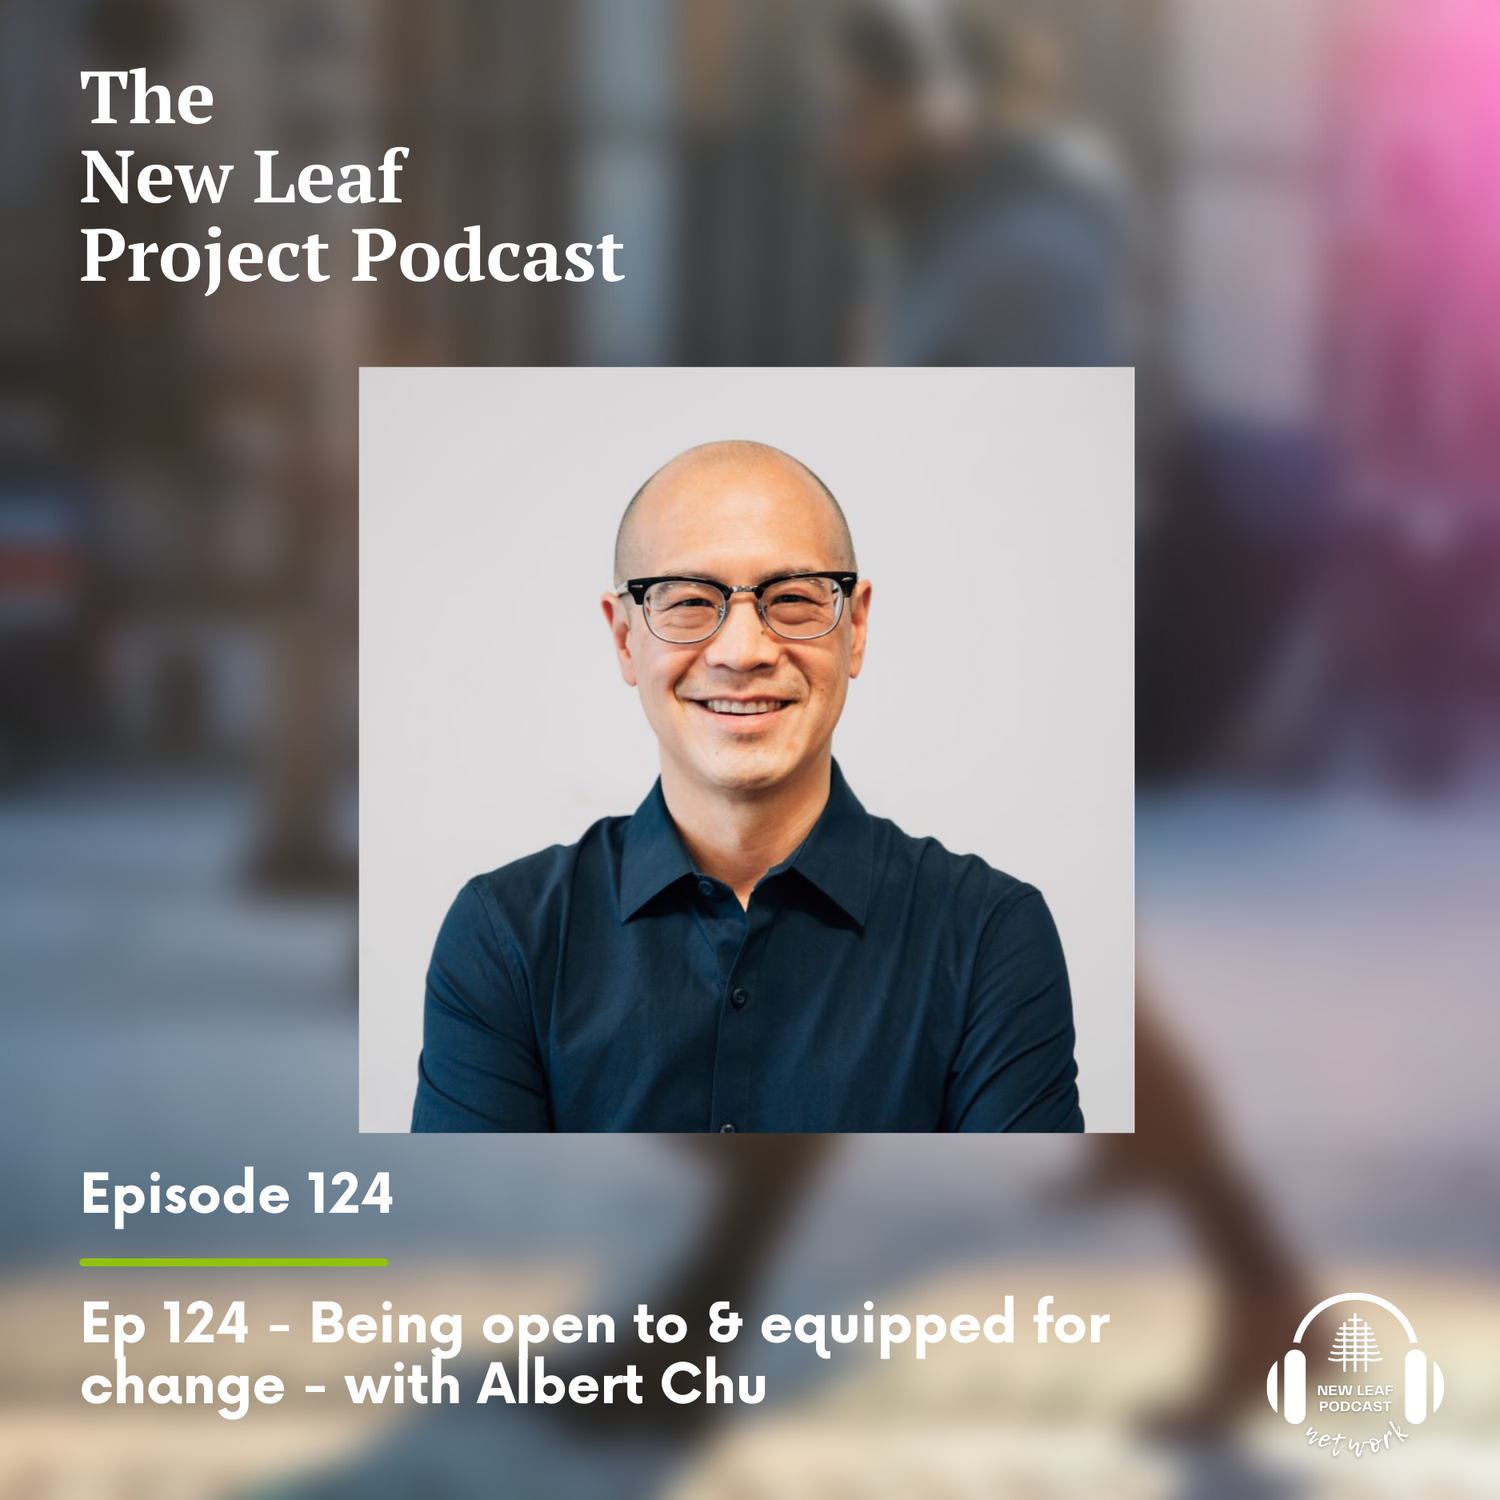 Ep 124 - Being open to & equipped for change - with Albert Chu